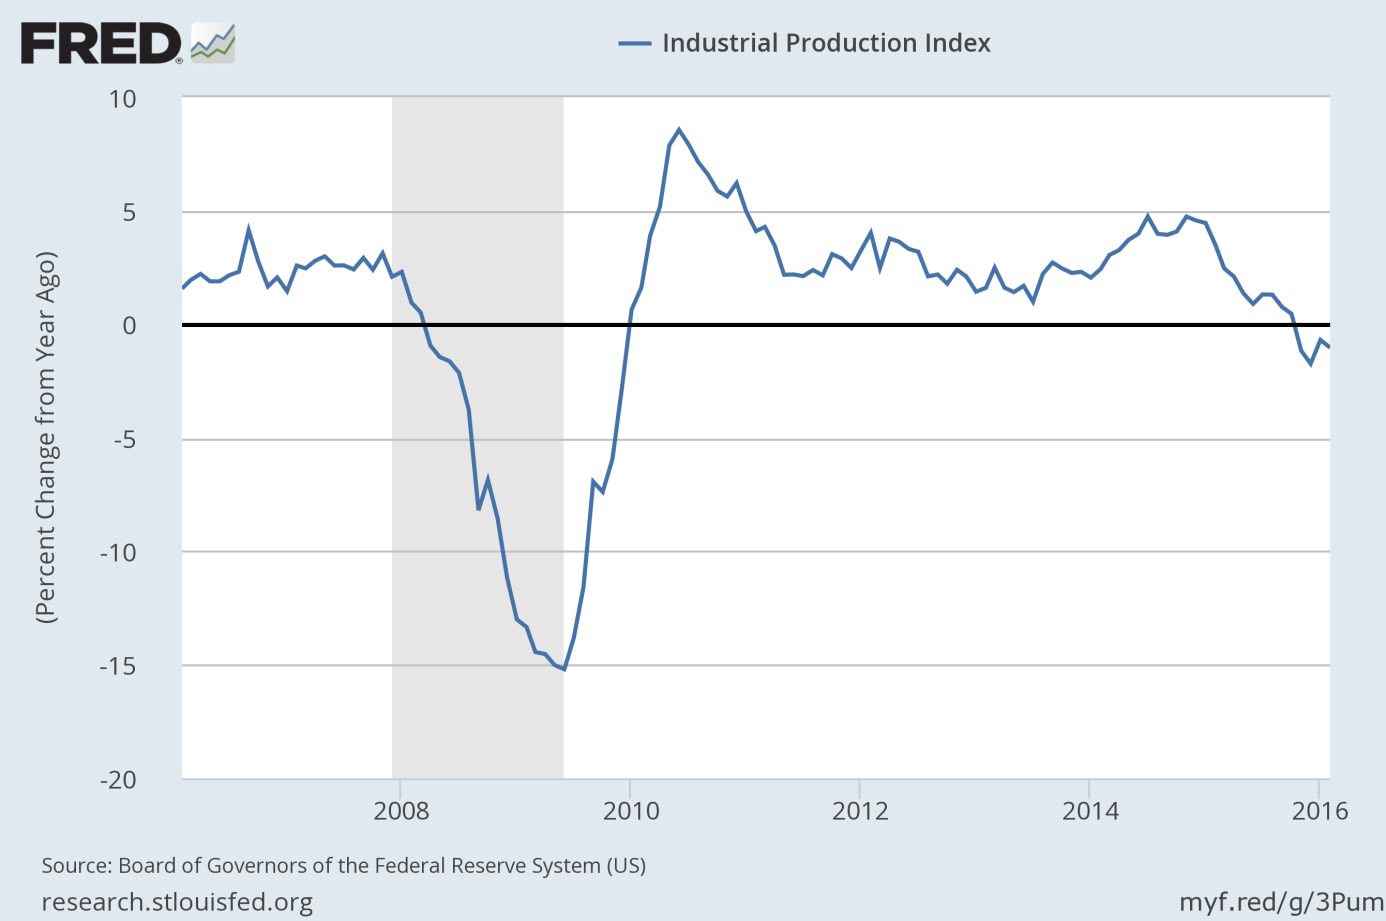 Industrial Production (as percent change from year ago) from 2006 to 2016